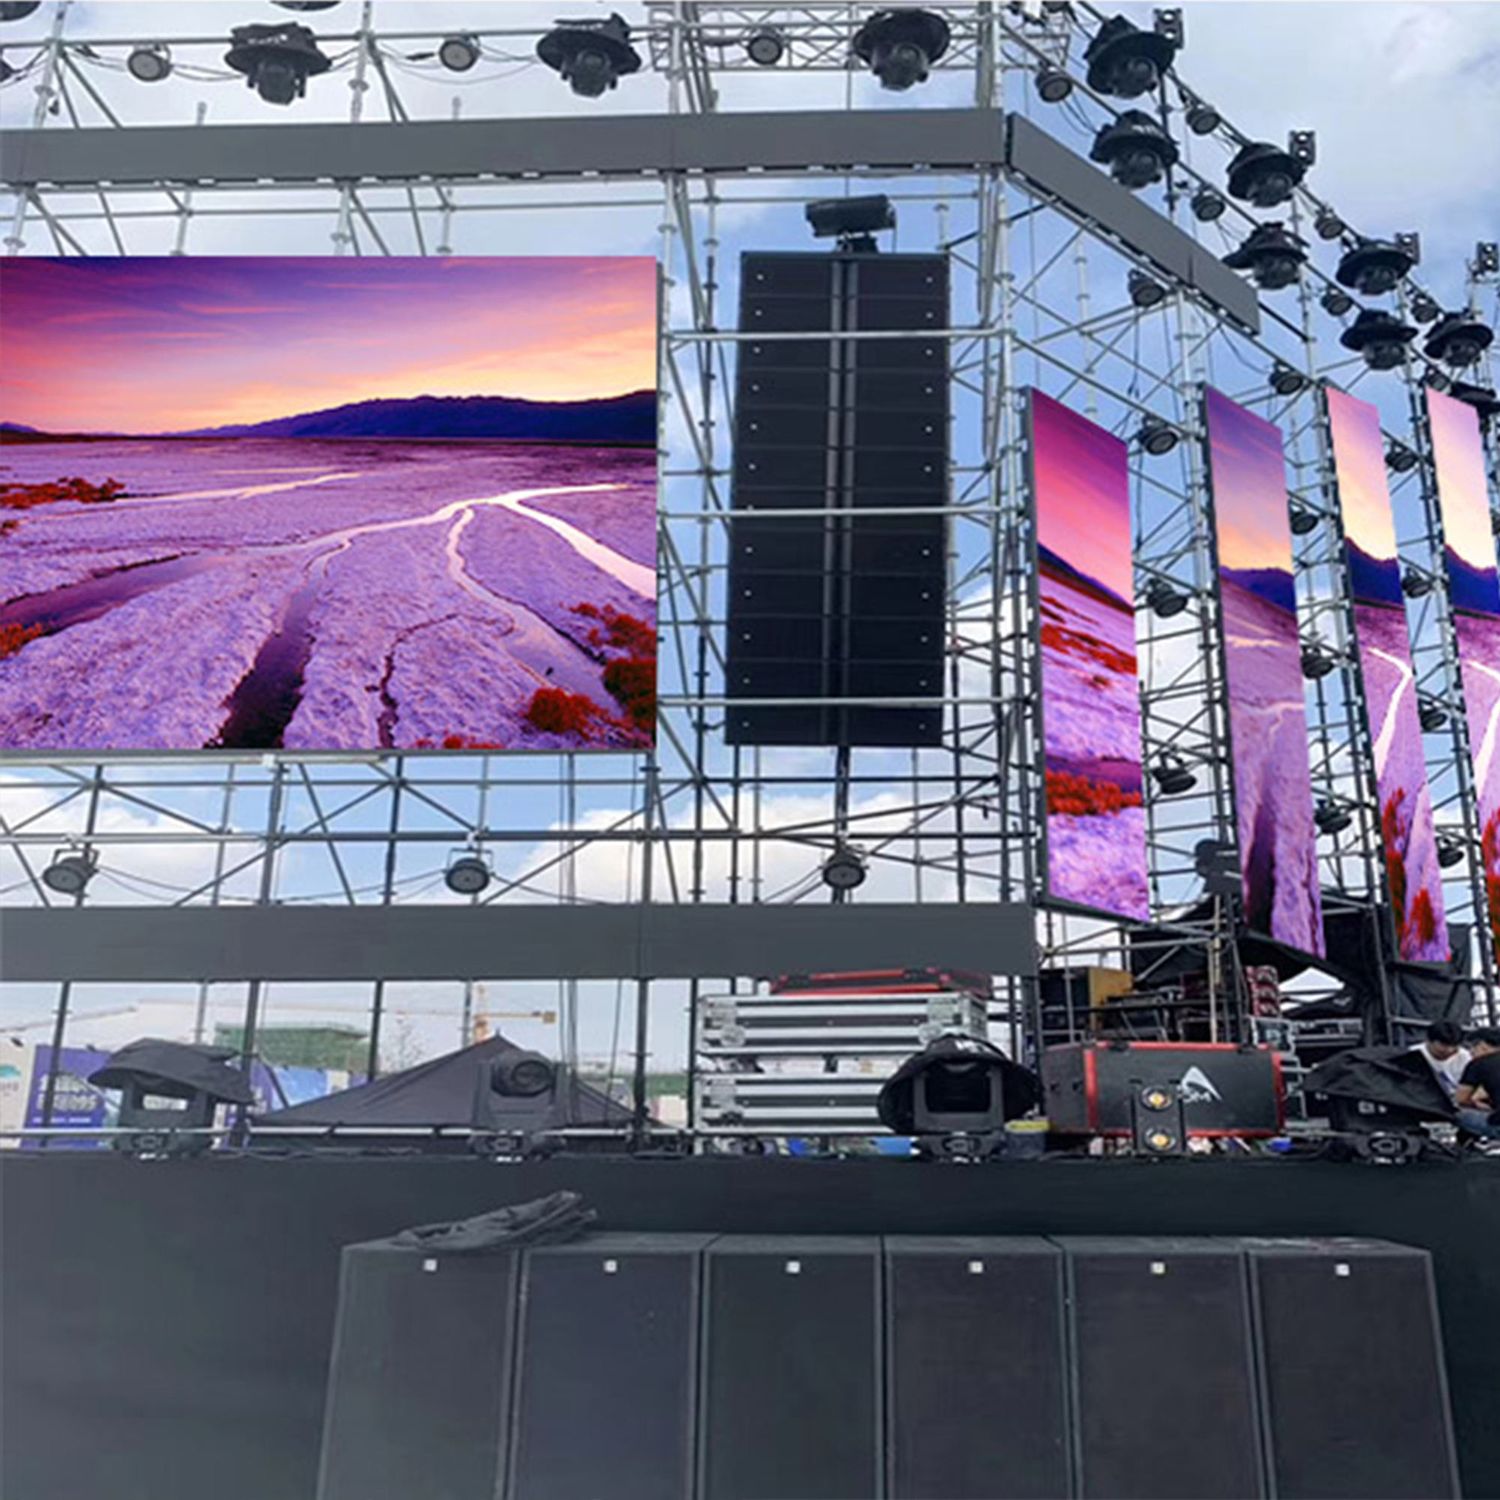 An outdoor event stage featuring a stunning portable LED display screen